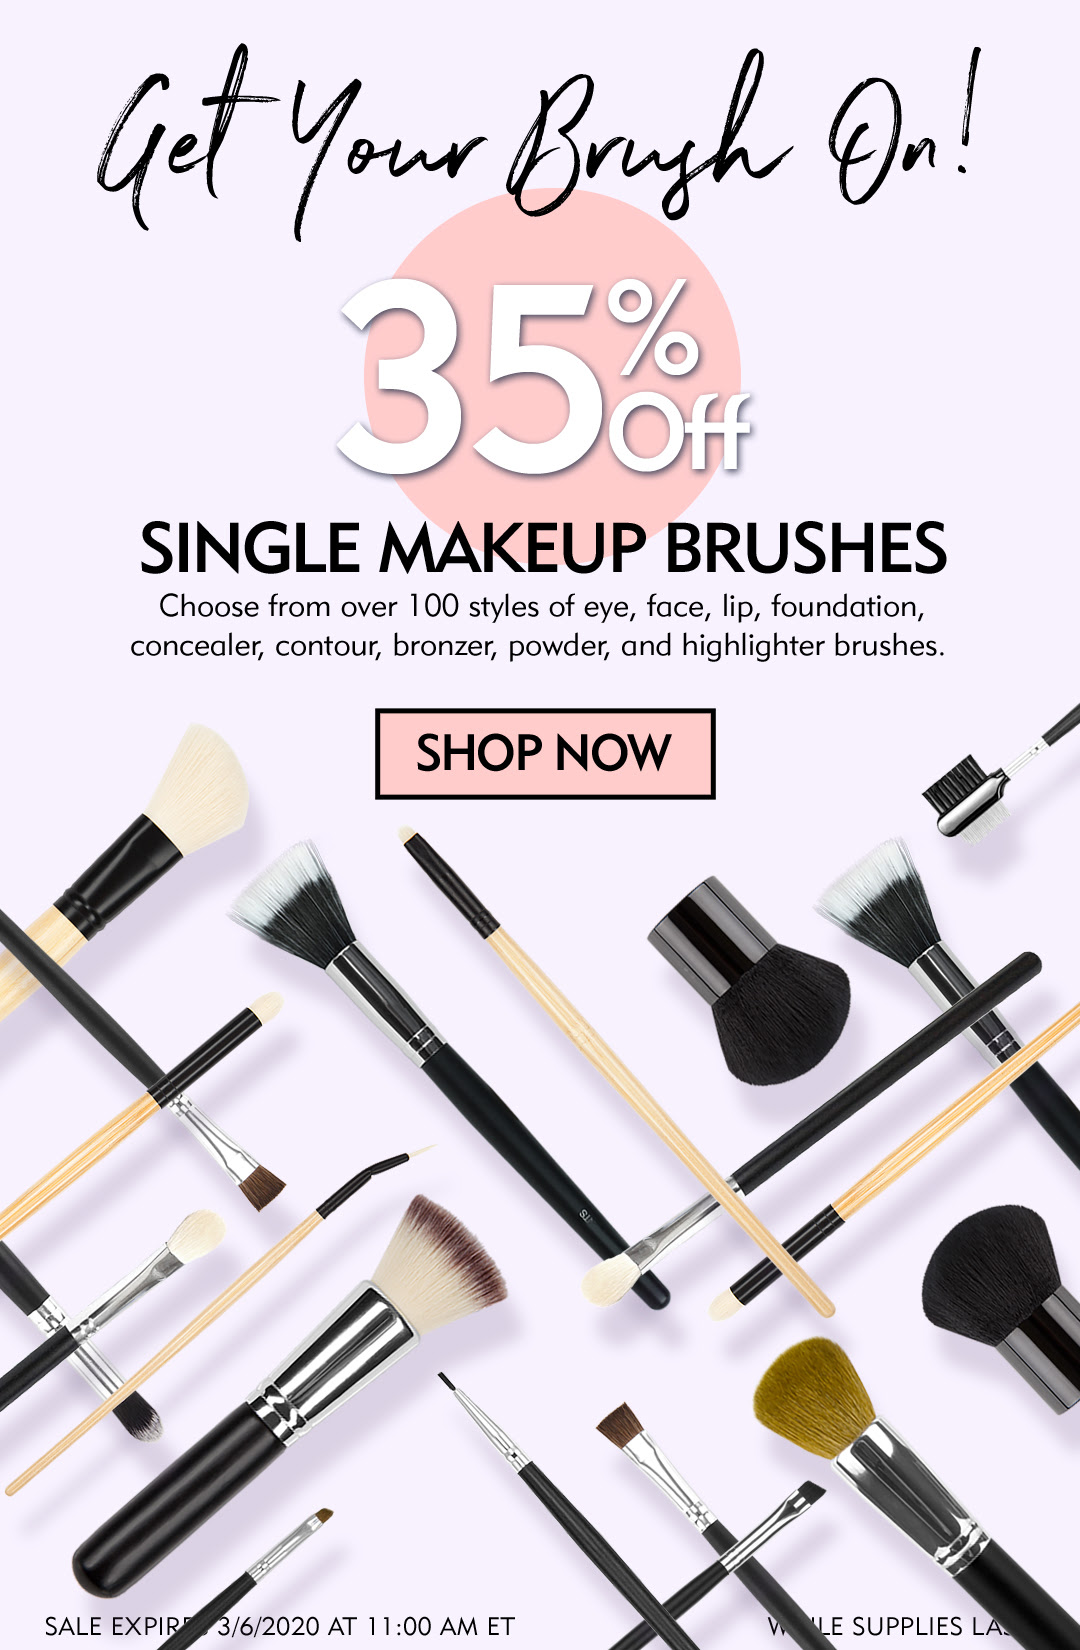 Choose from over 100 styles of eye, face, lip, foundation,  concealer, contour, bronzer, powder, and highlighter brushes.